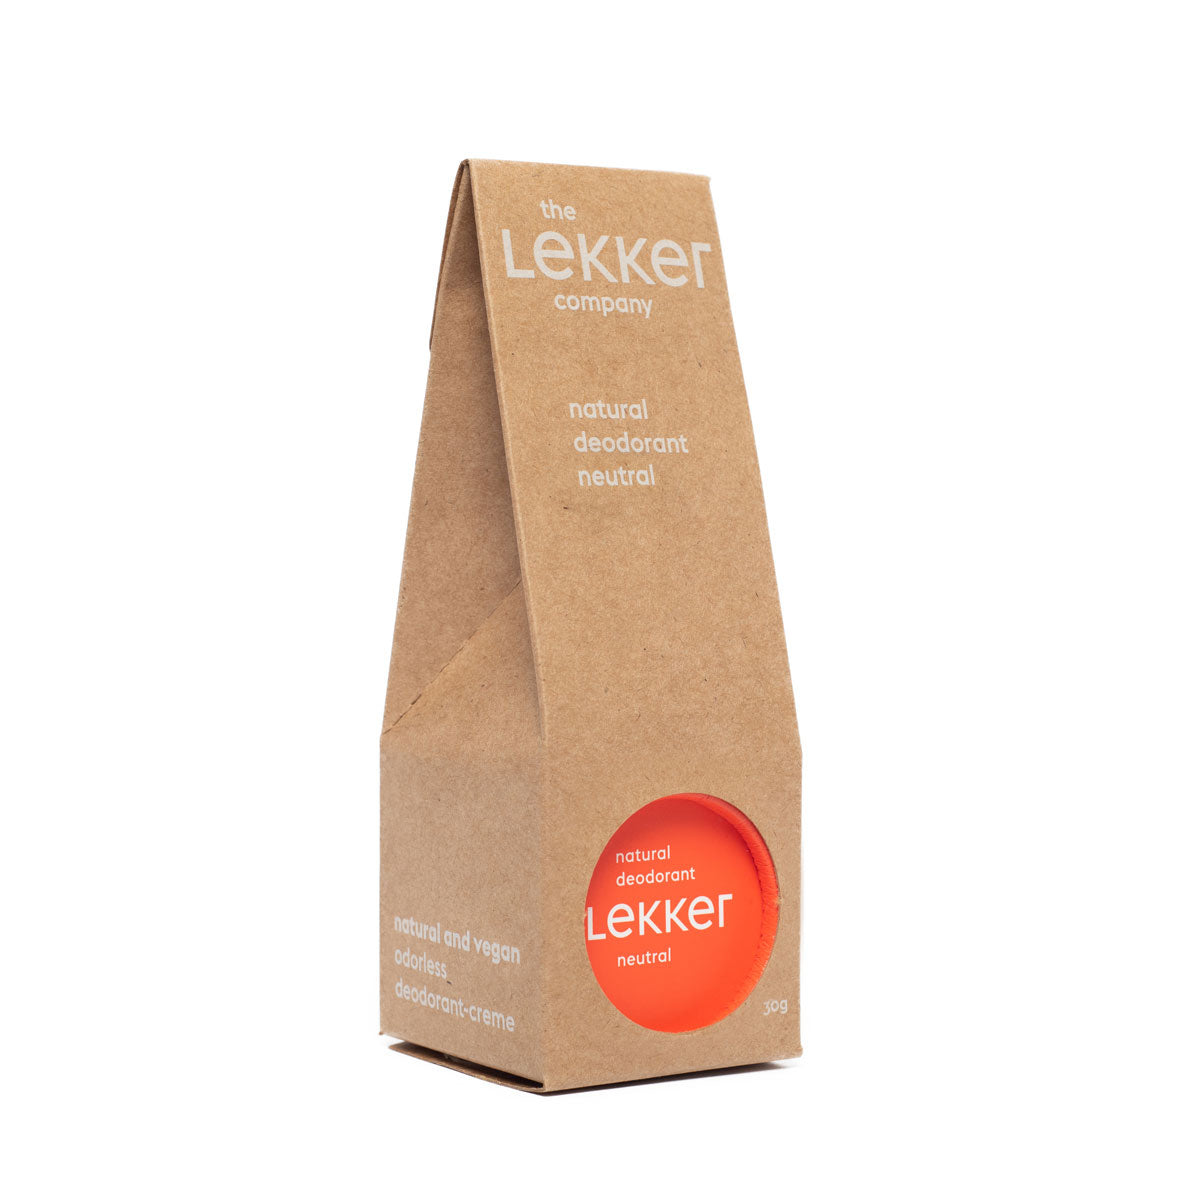 The Lekker Company Natural Deodorant with Packaging